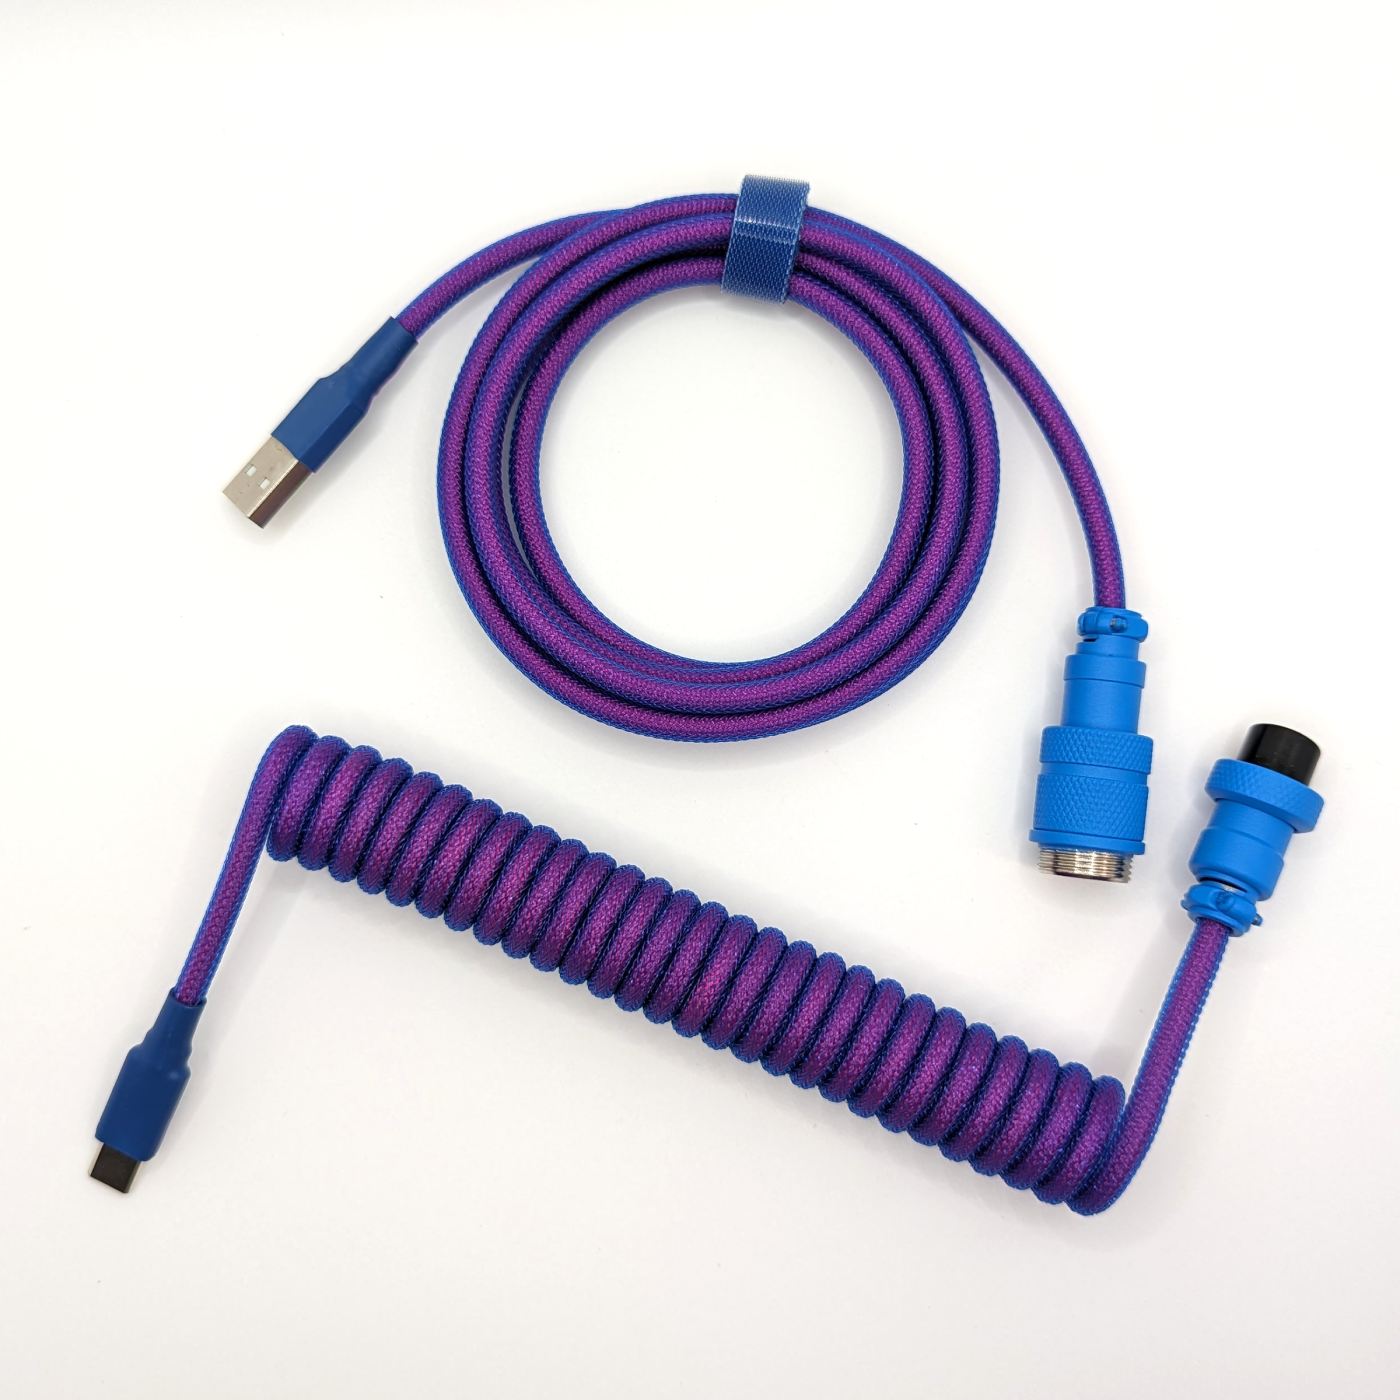 Custom USB Cables for Keyboards and More